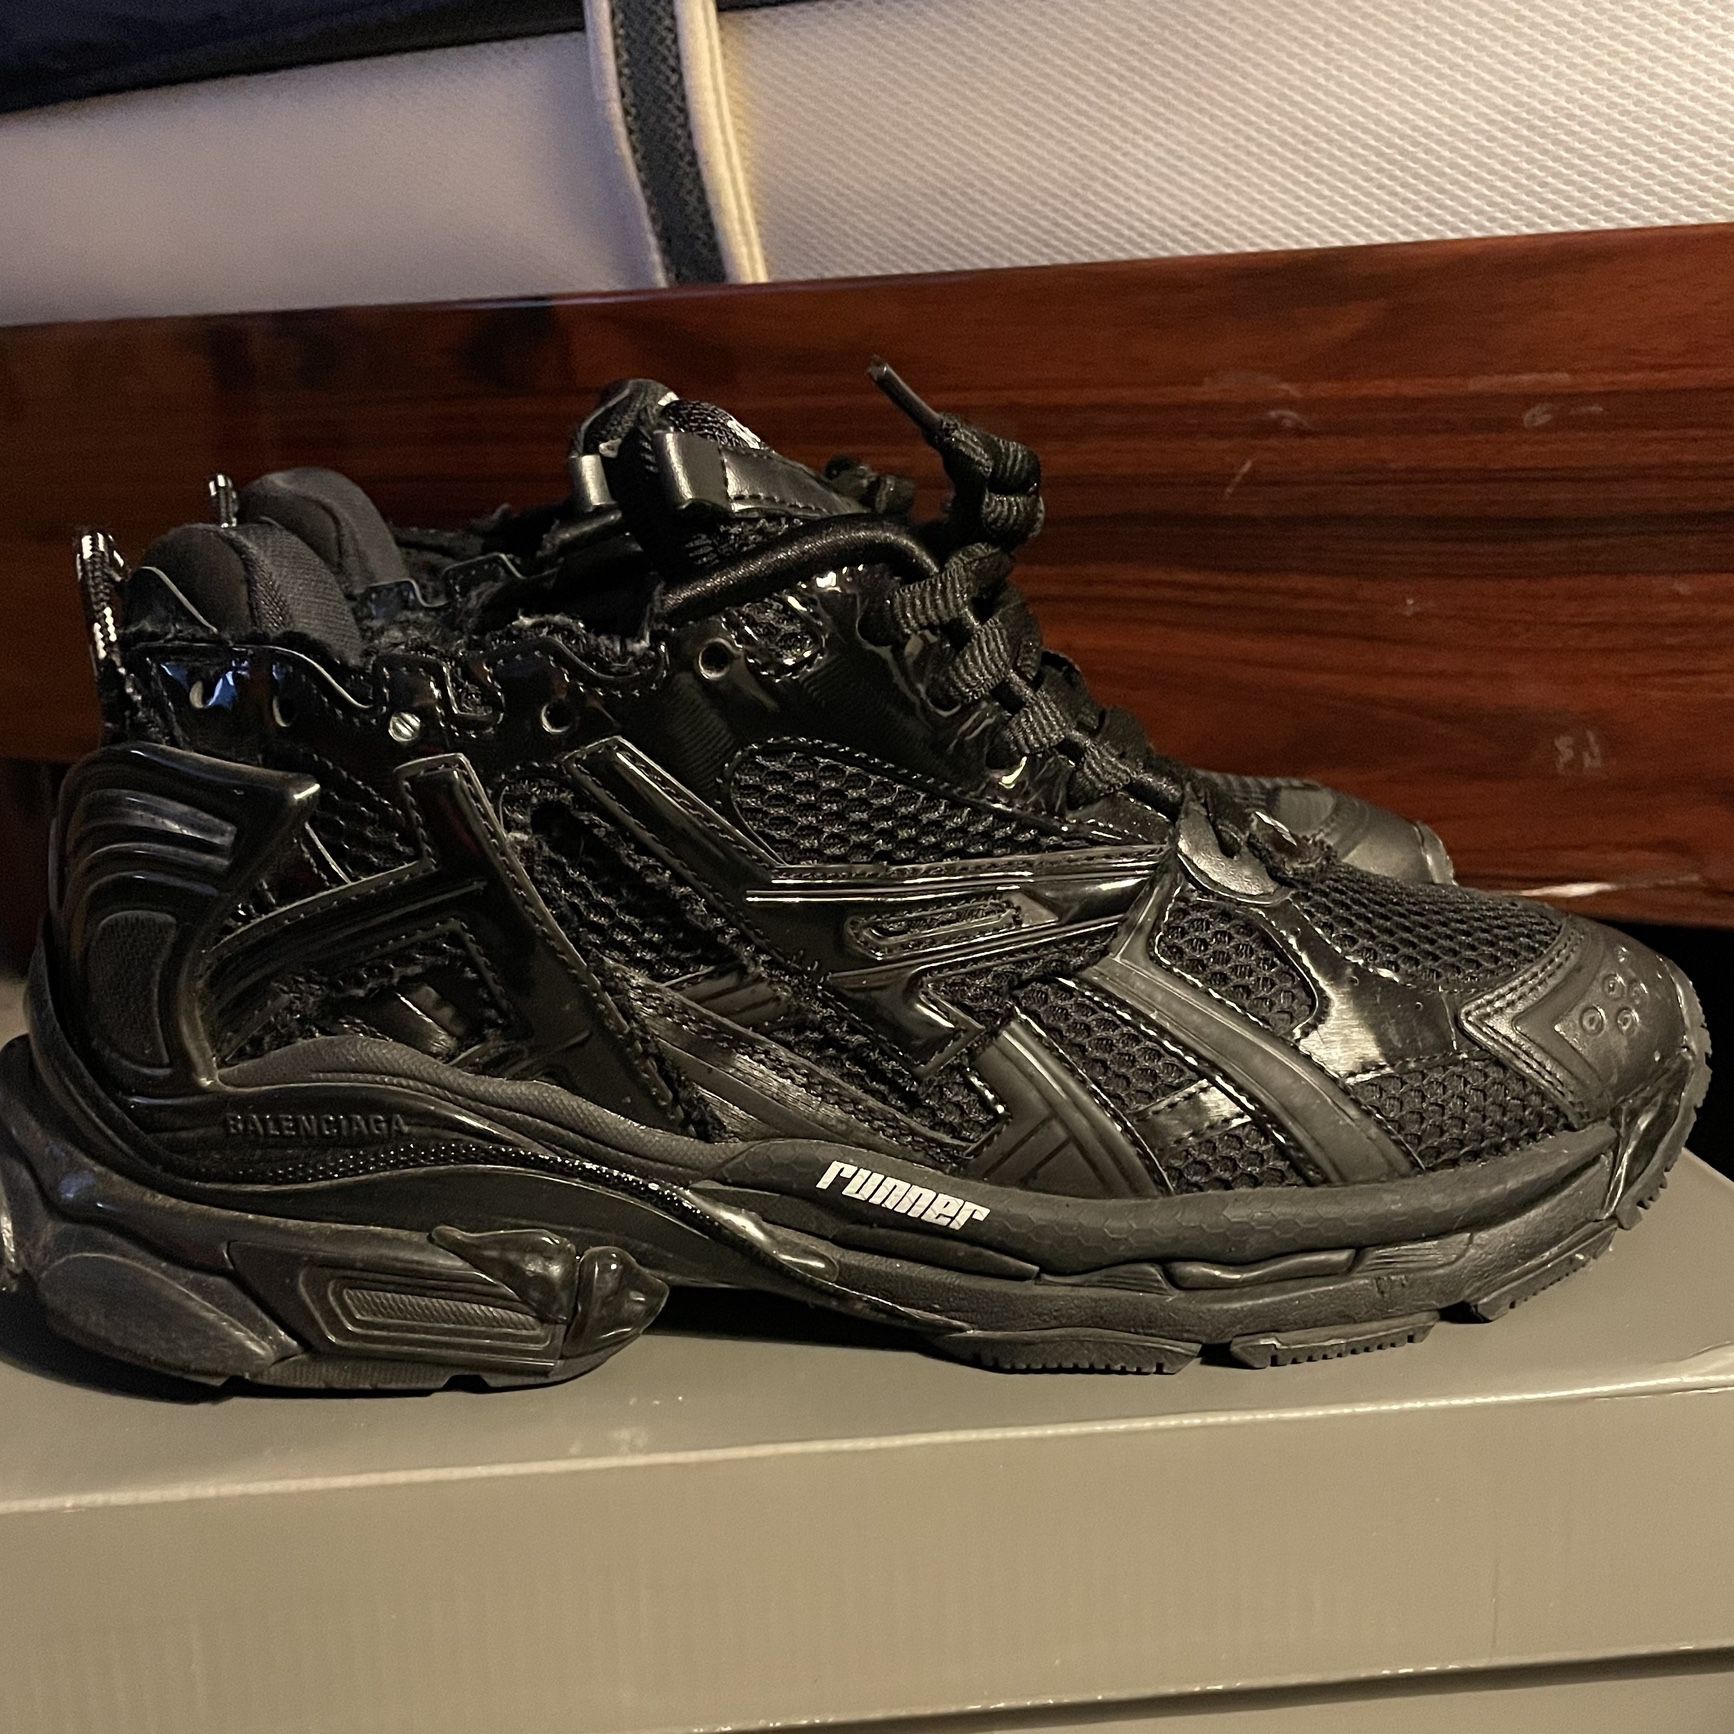 Balenciaga Track Runners Sz 10.5 for Sale in Bronx, NY - OfferUp